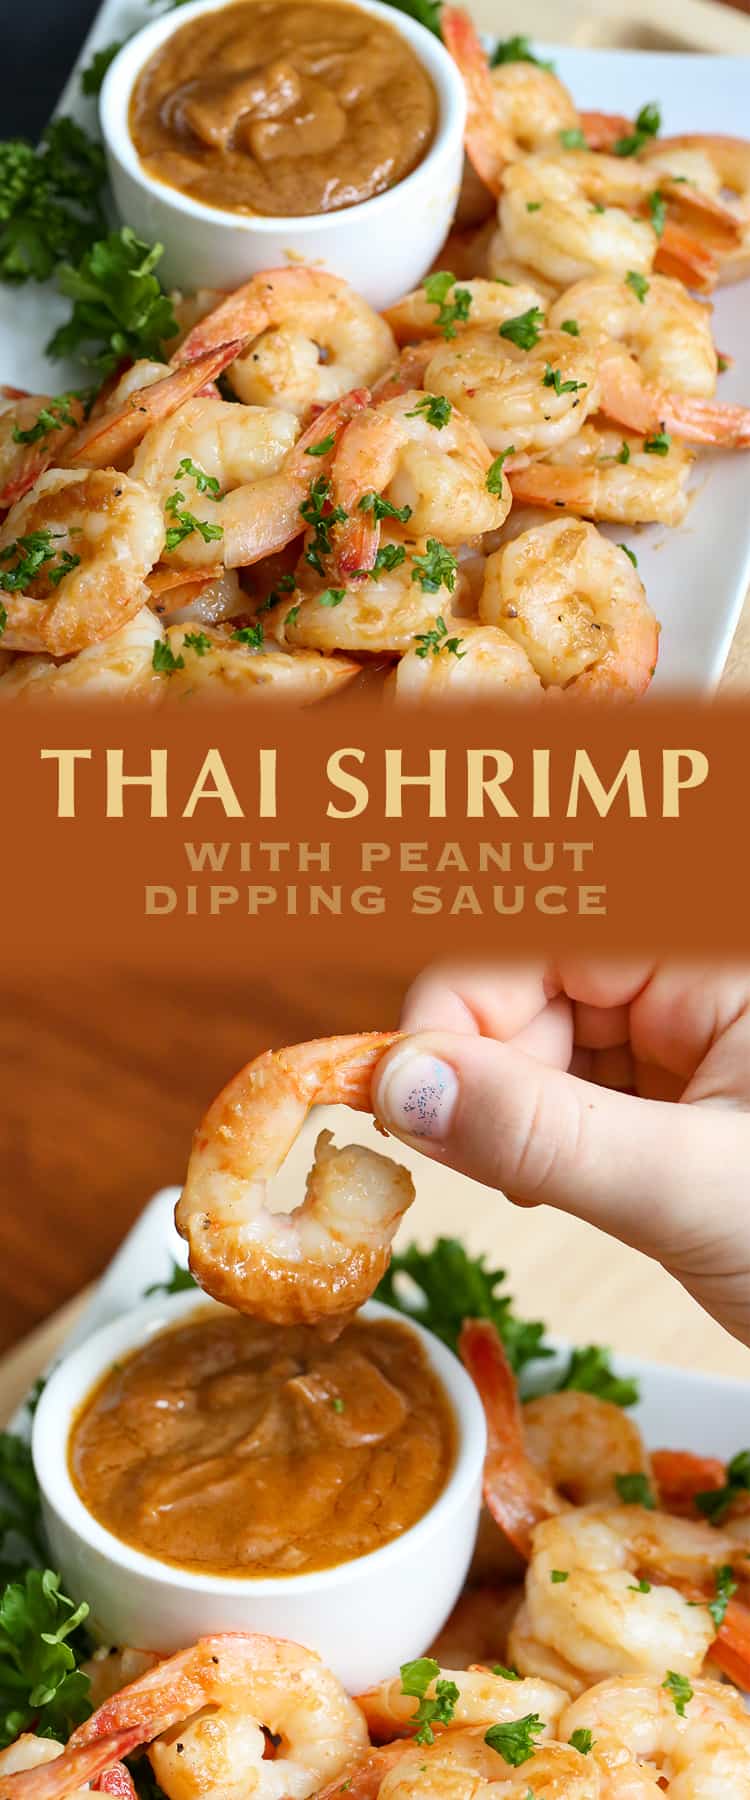 A plate of food, with Shrimp and Dipping sauce